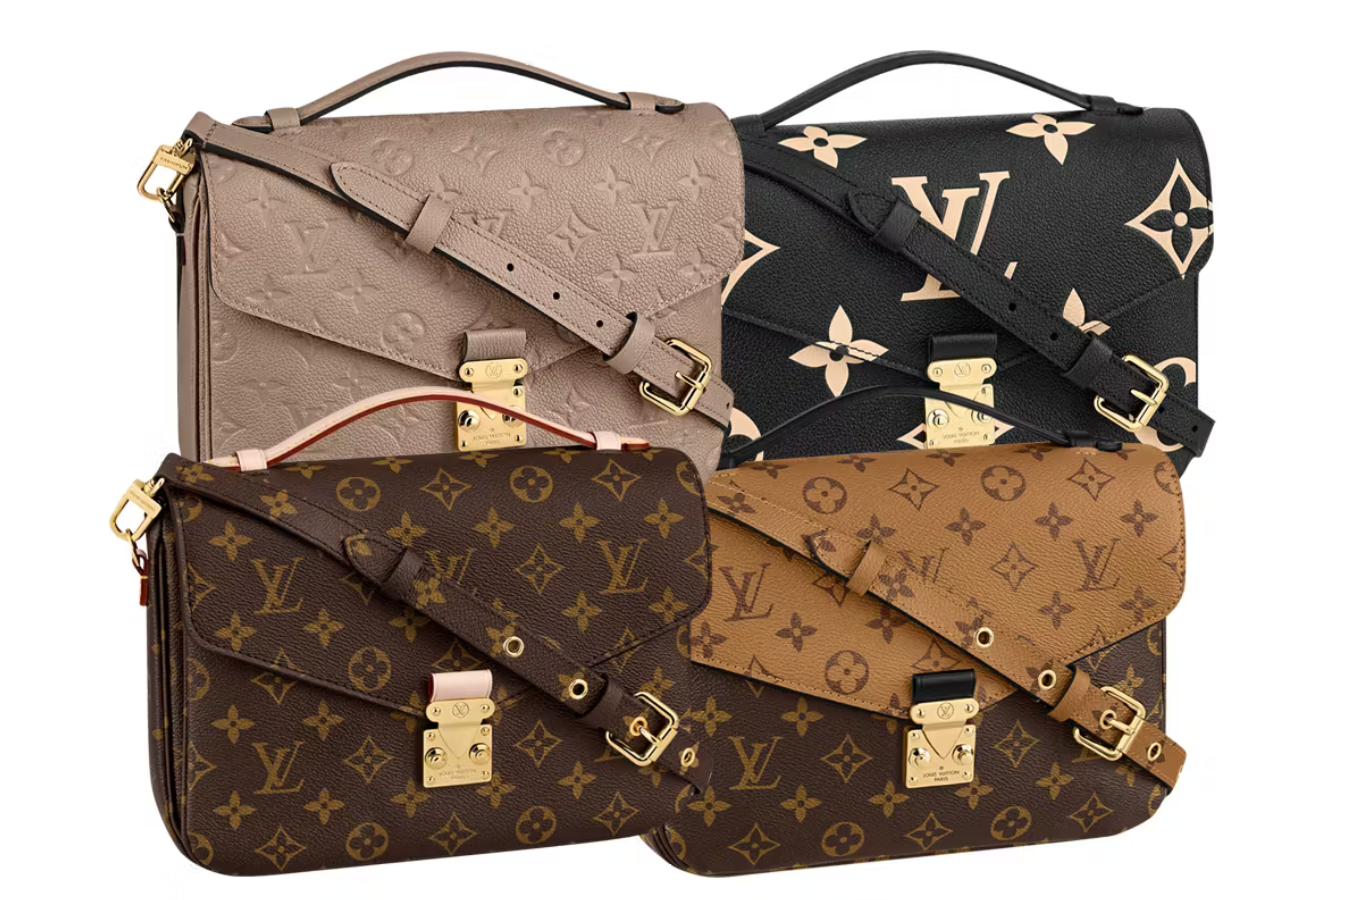 Louis Vuitton Home & Lifestyle Collection - BAGAHOLICBOY